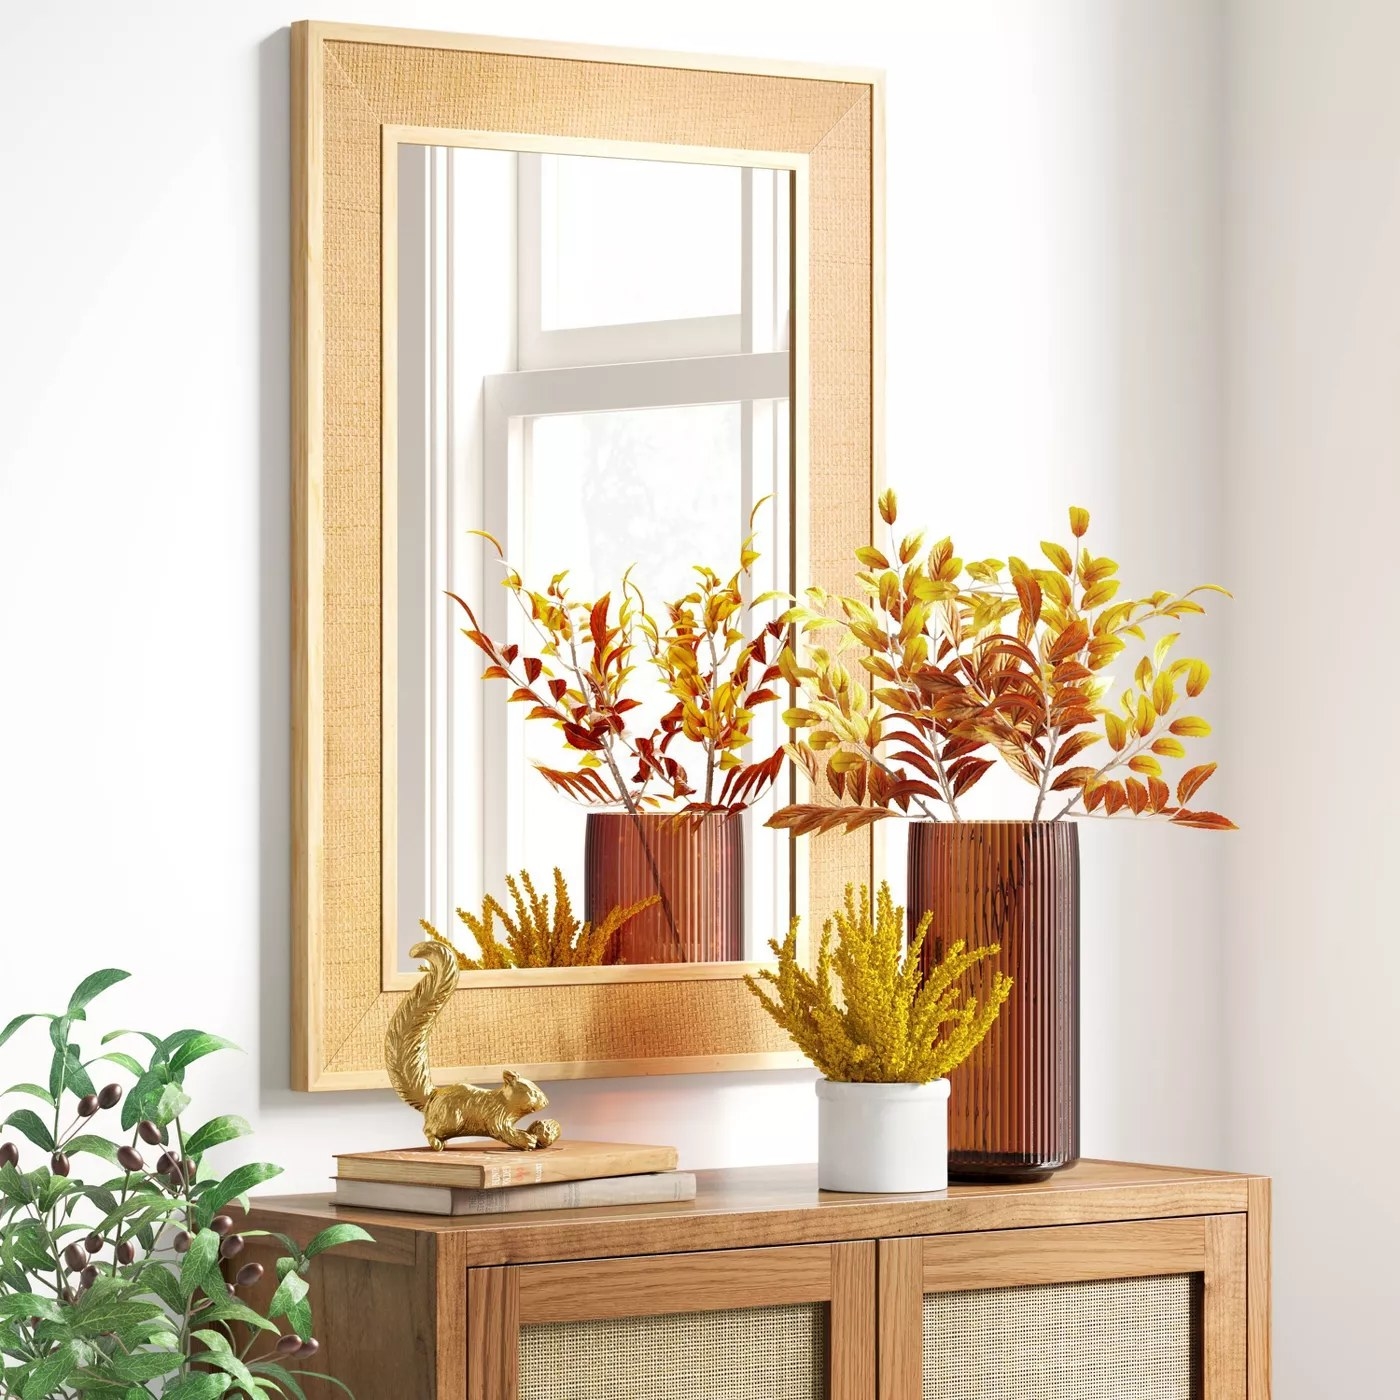 The rectangular mirror with a rattan frame hanging above a cabinet